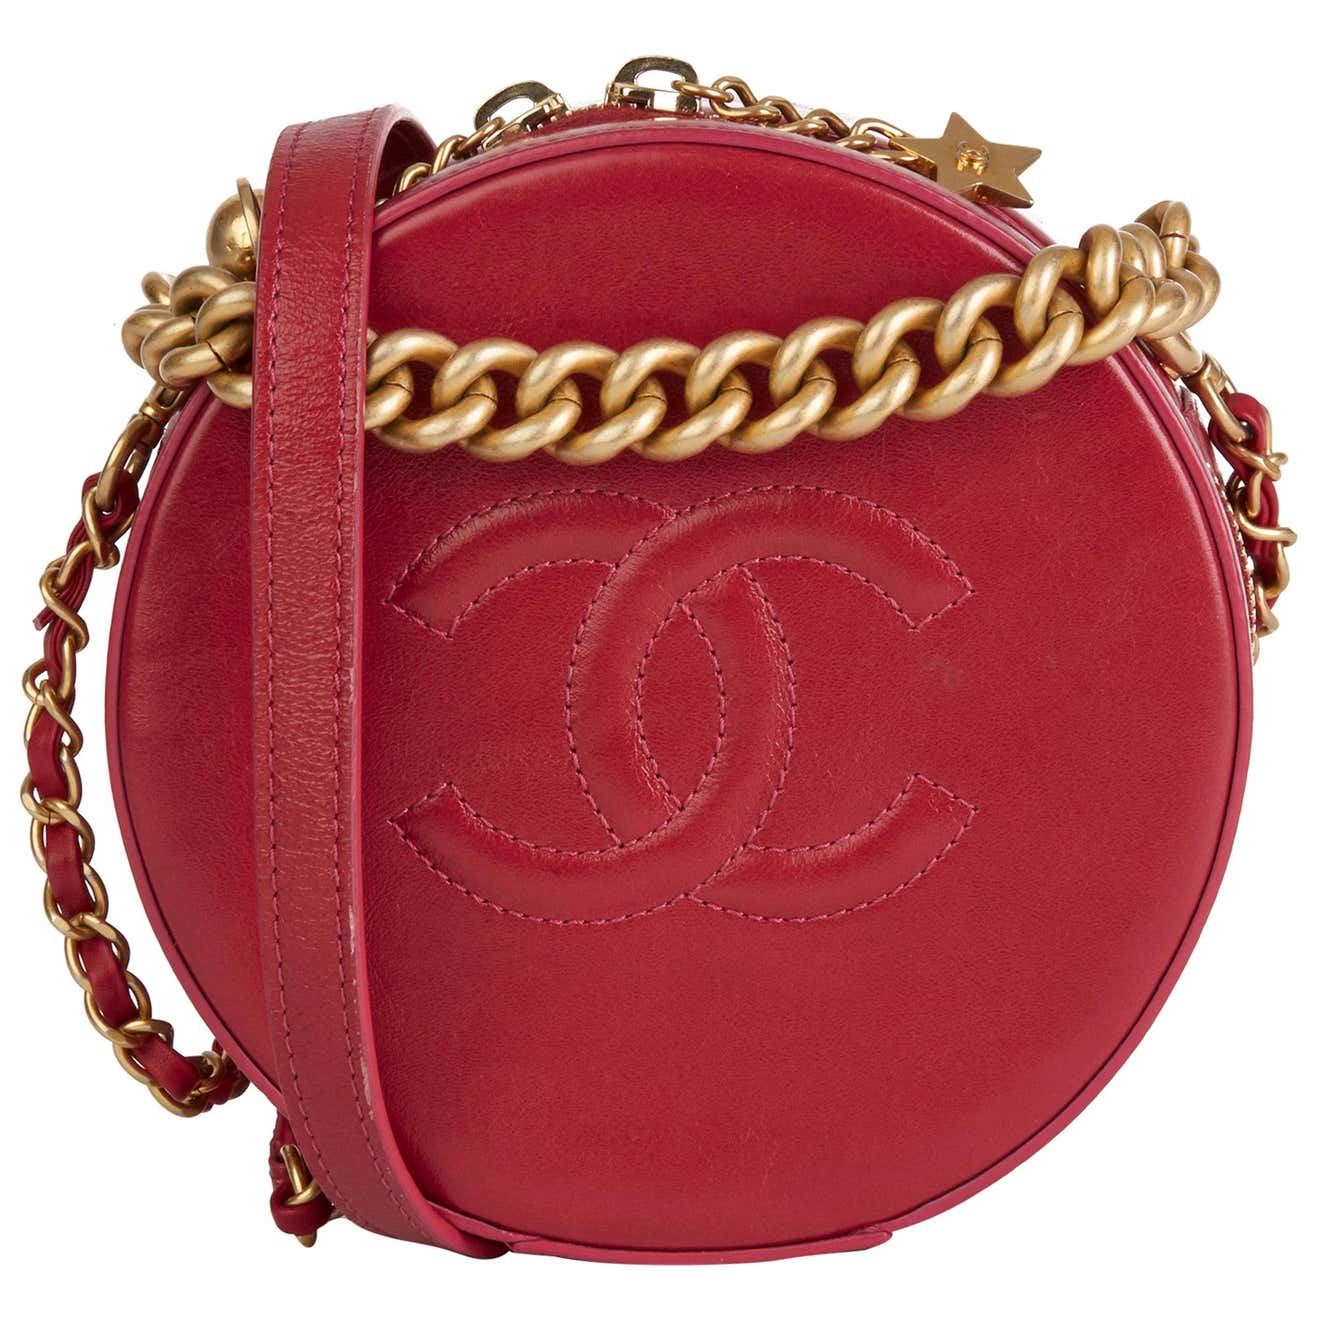 2018 Chanel Raspberry Glazed Calfskin Leather Round as Earth Bag For ...